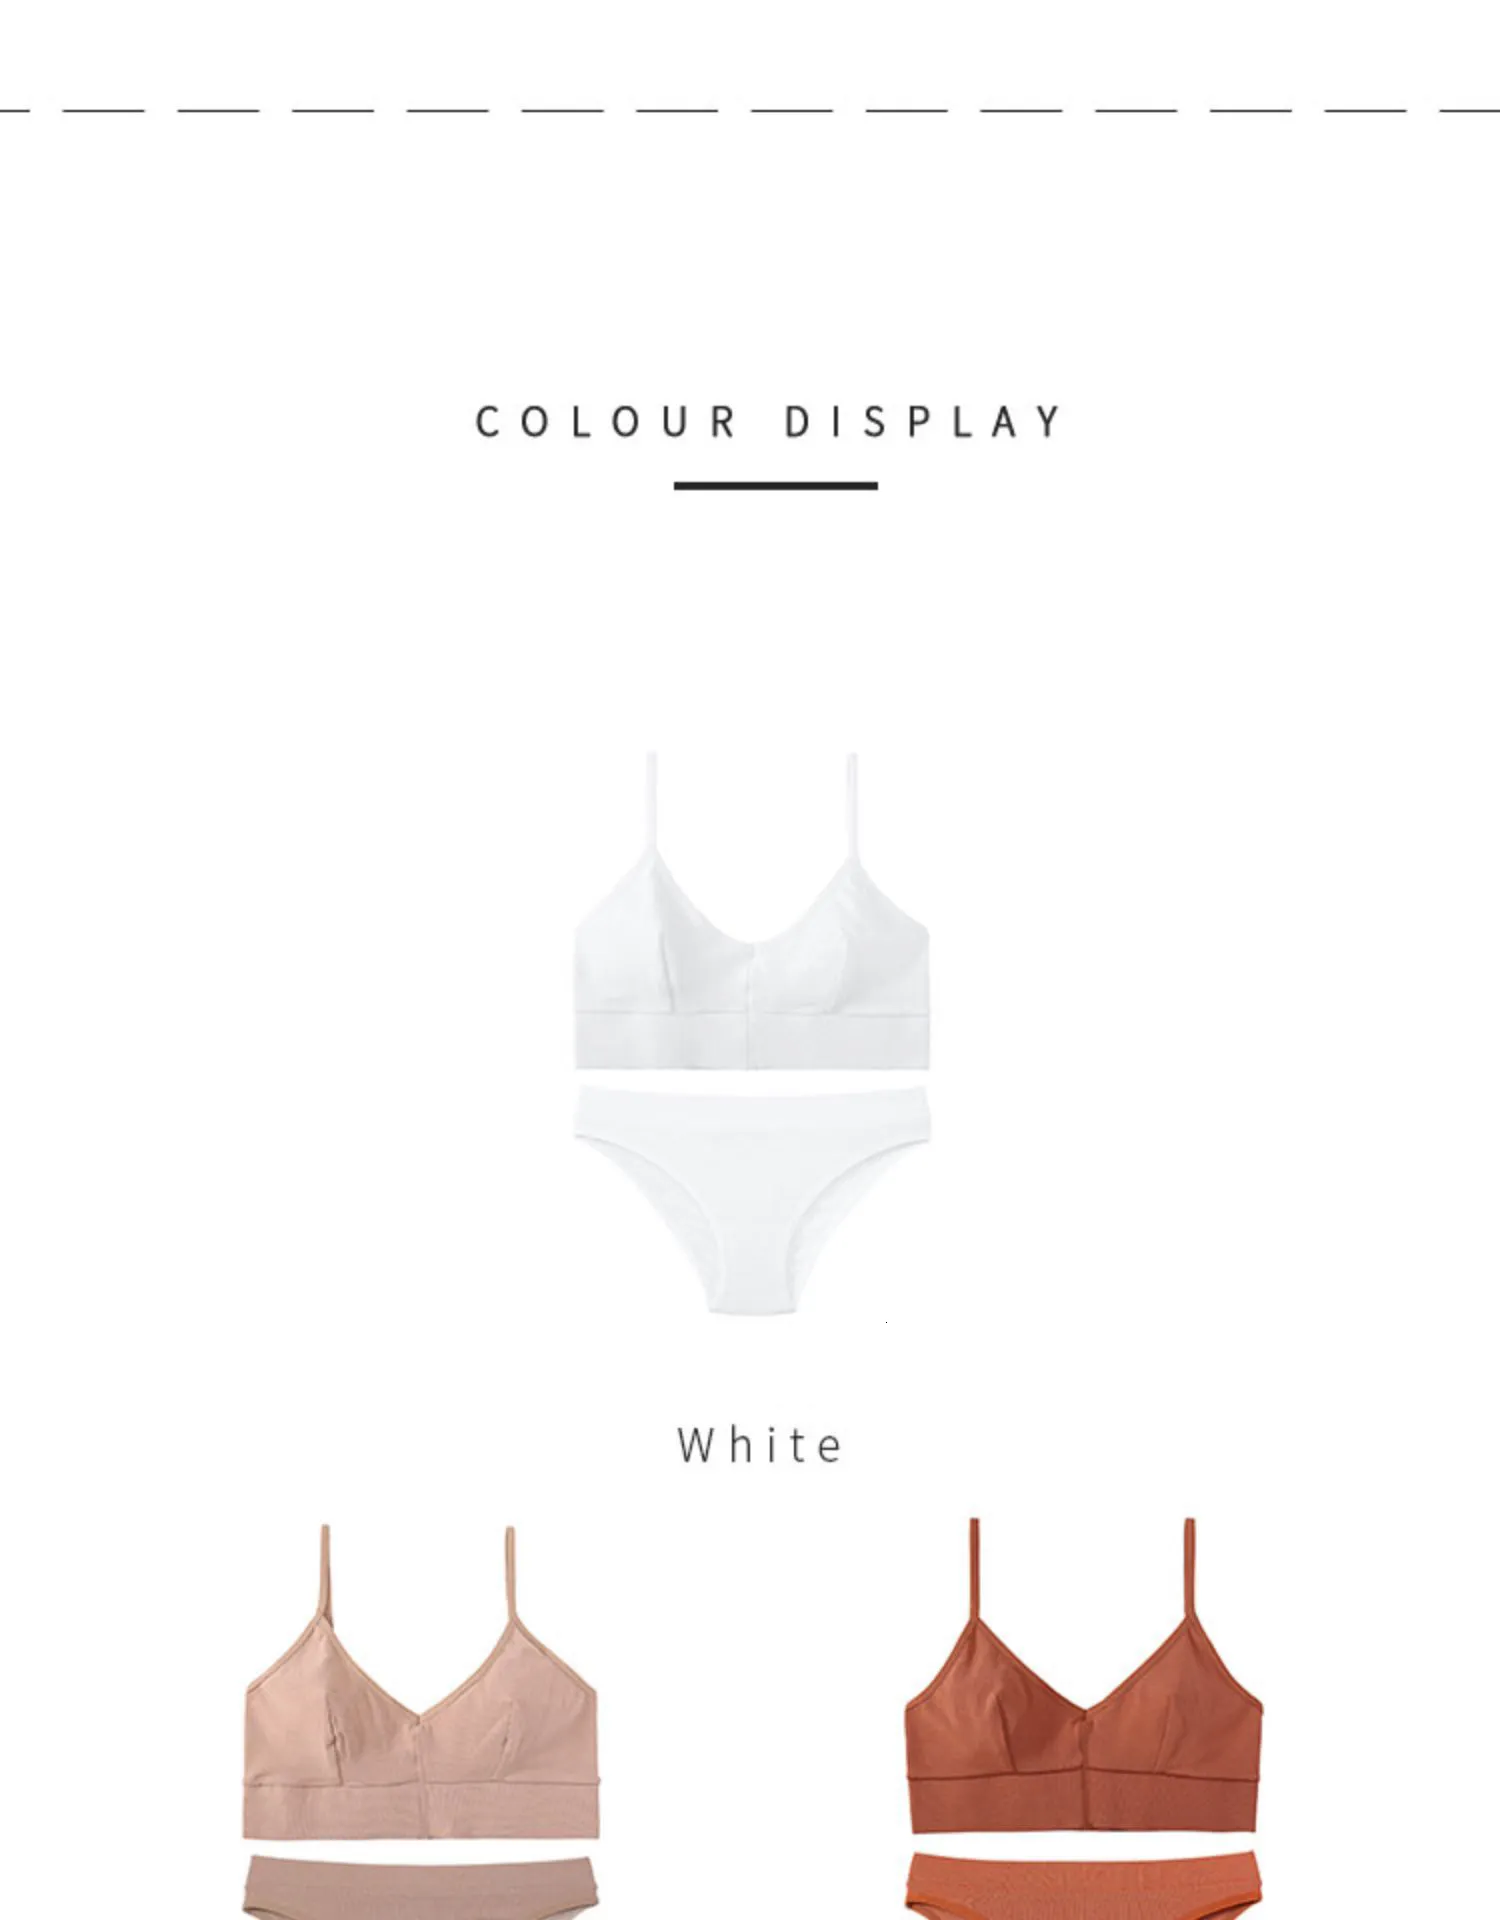 High Quality Seamless Bra Set For Women Sexy Low Waist Zivame Bra Panty Sets  With Wire Free Design Cotton Lingerie For A Sexy Look Brassiere Bralette  Underwear 230613 From Ren02, $12.96